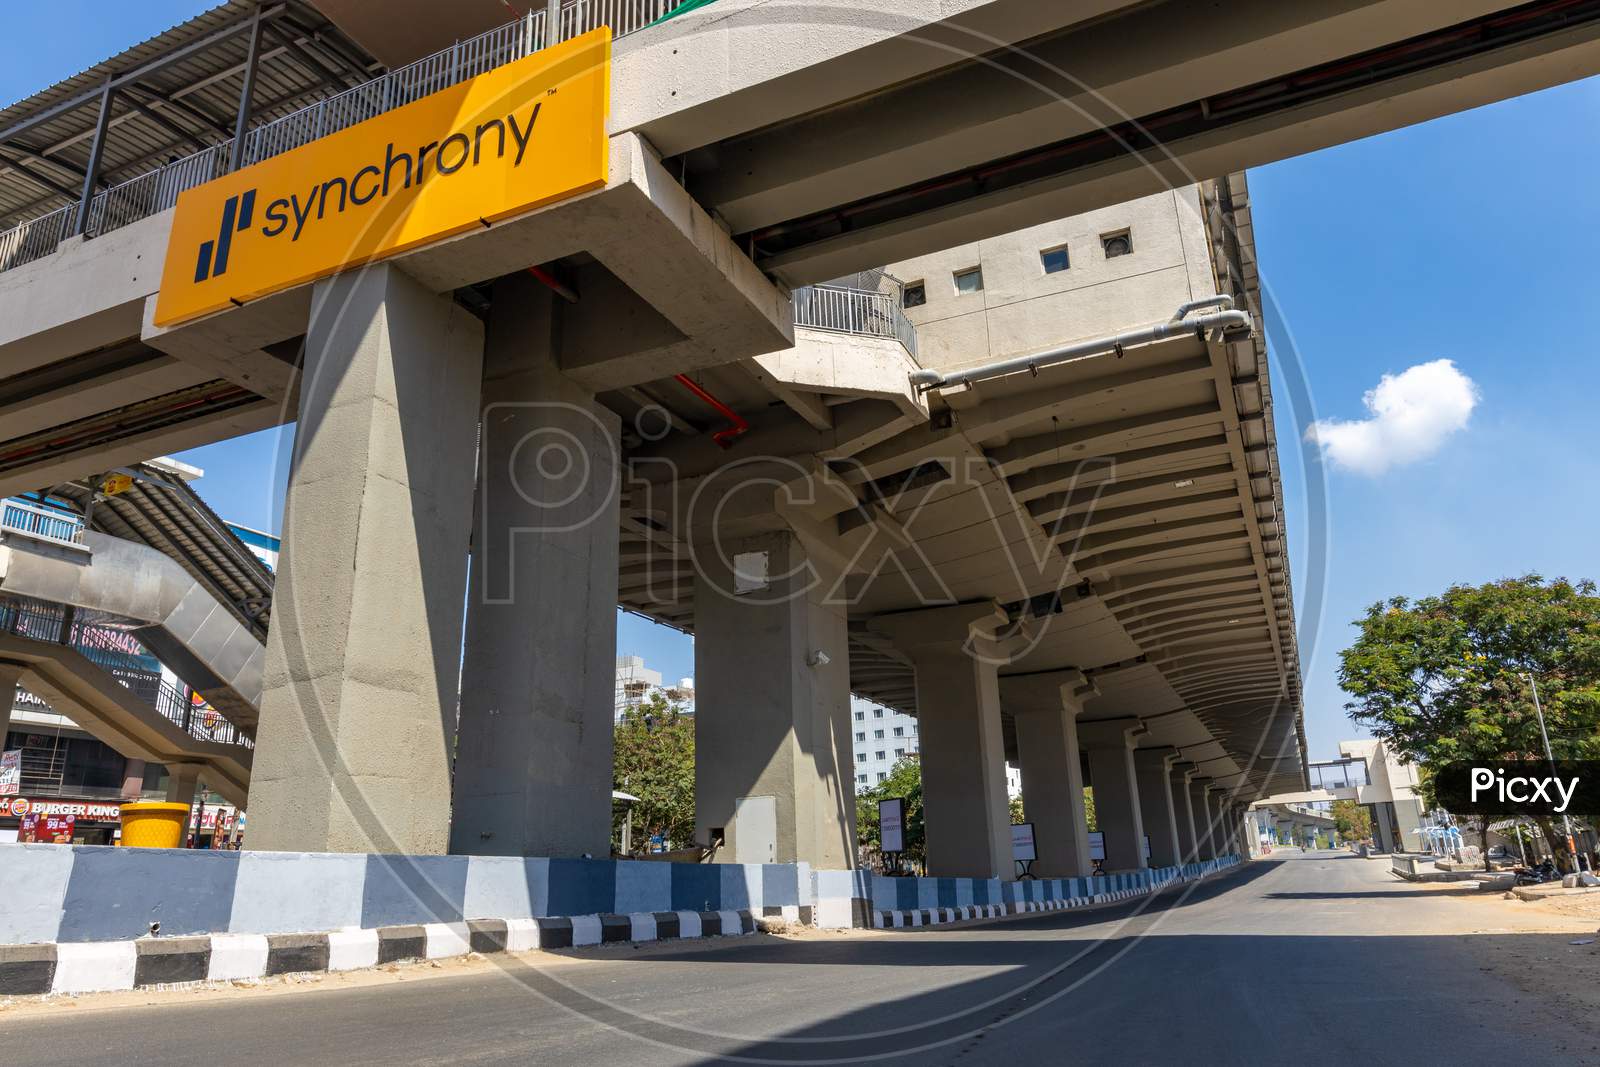 Janata Curfew, Deserted Roads At  Synchrony Raidurg Metro Station  in Hyderabad  As Indian Prime Minister Narendra Modi Called For a 14 Hour Janta  Curfew Or Self-imposed  Quarantine To Break The  Highly Contagious  COVID 19 Or Corona Virus Spread